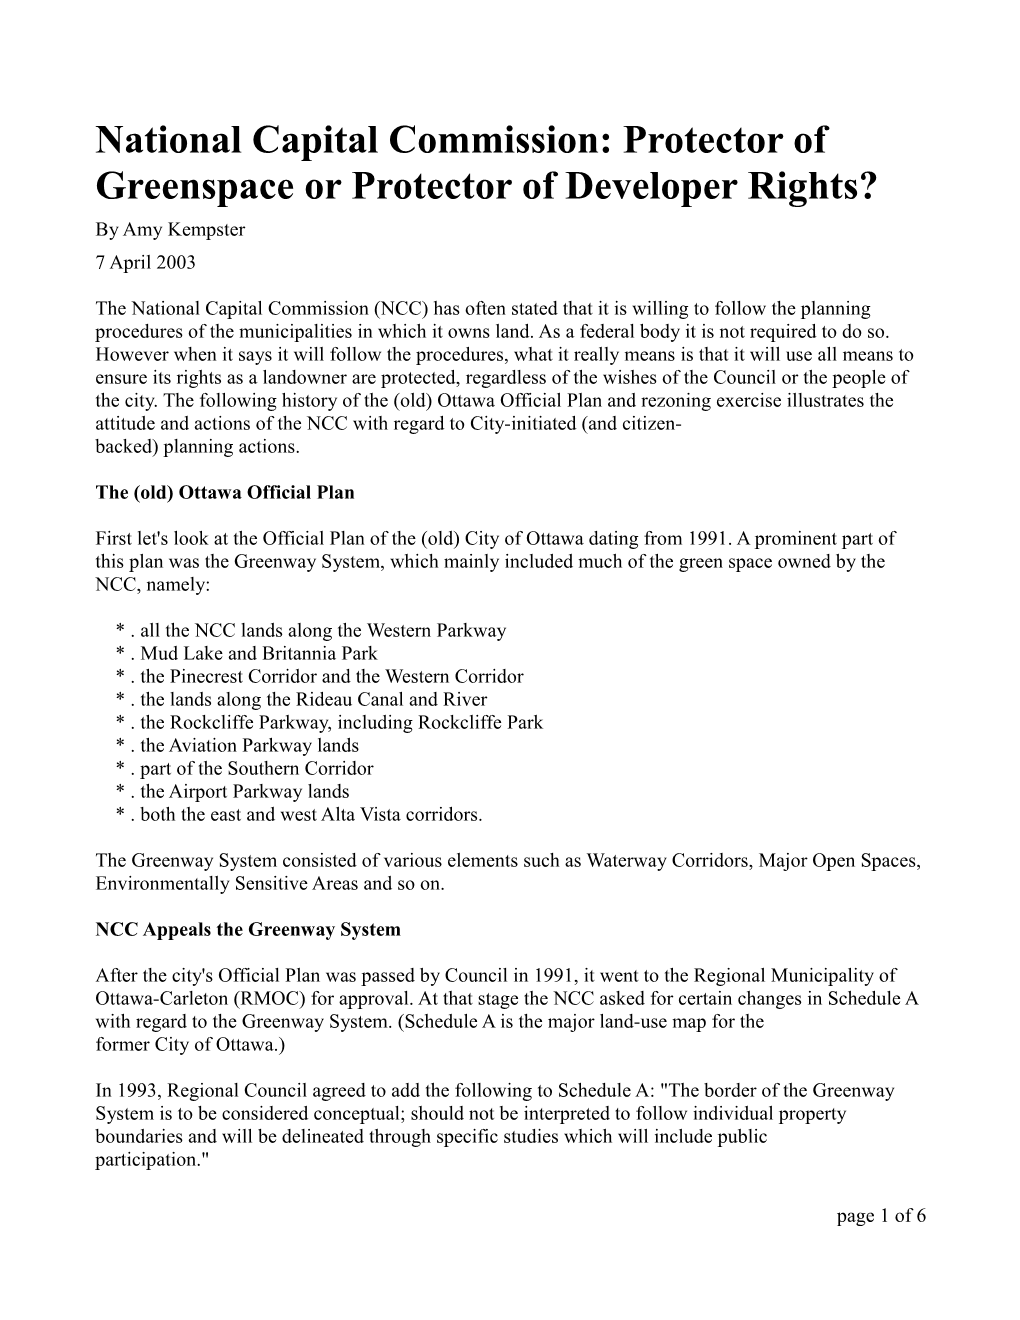 National Capital Commission: Protector of Greenspace Or Protector of Developer Rights? by Amy Kempster 7 April 2003